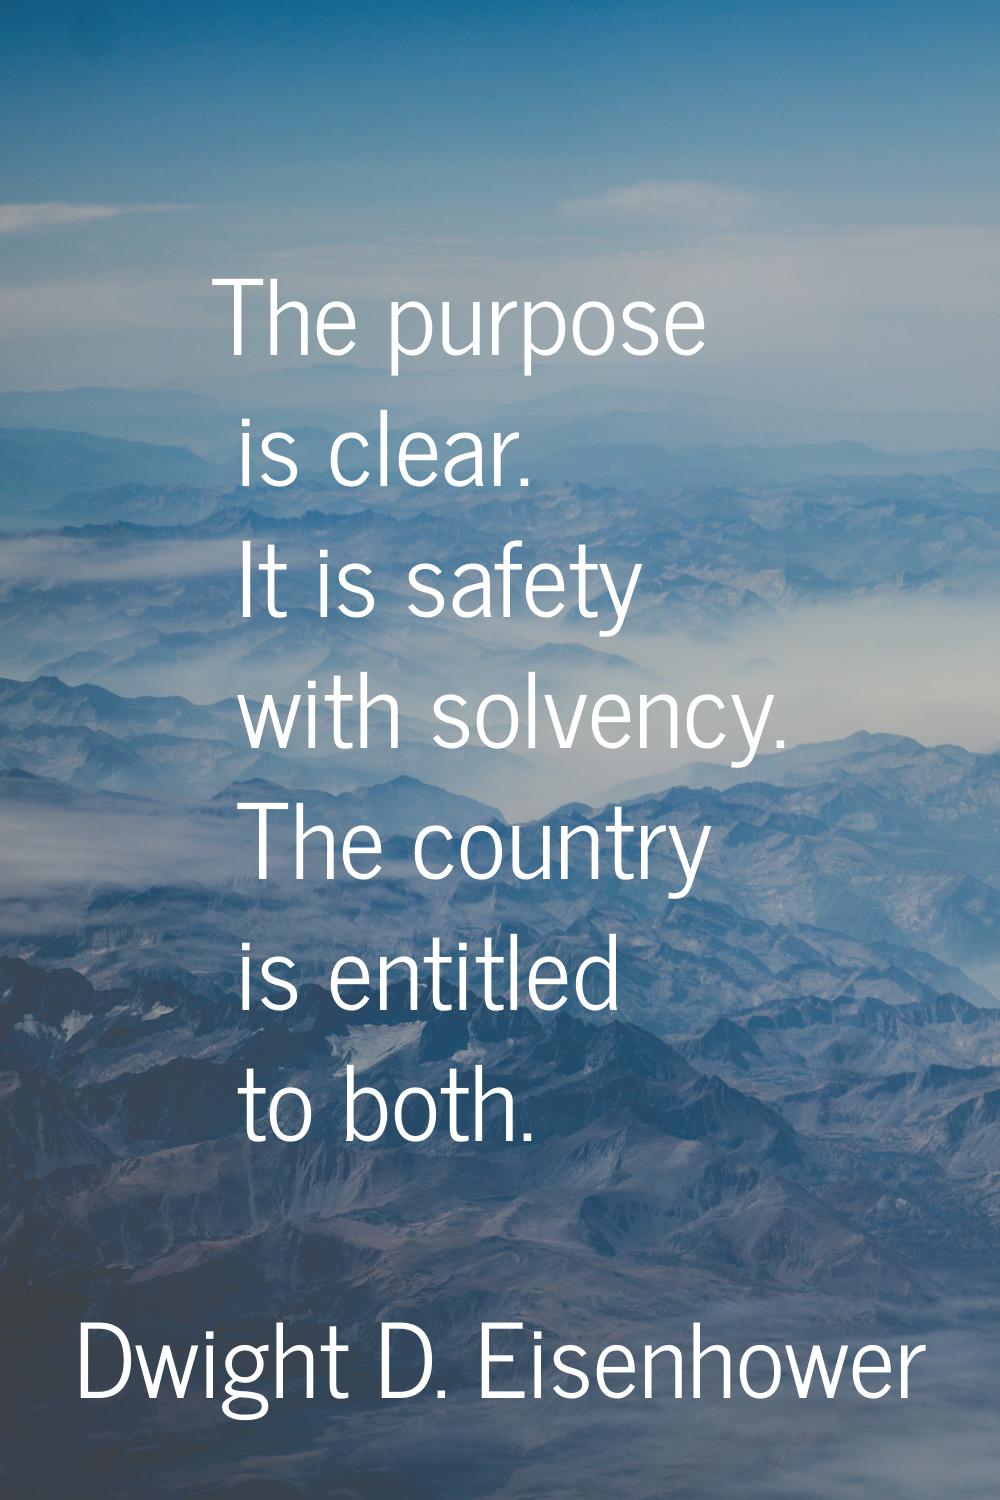 The purpose is clear. It is safety with solvency. The country is entitled to both.